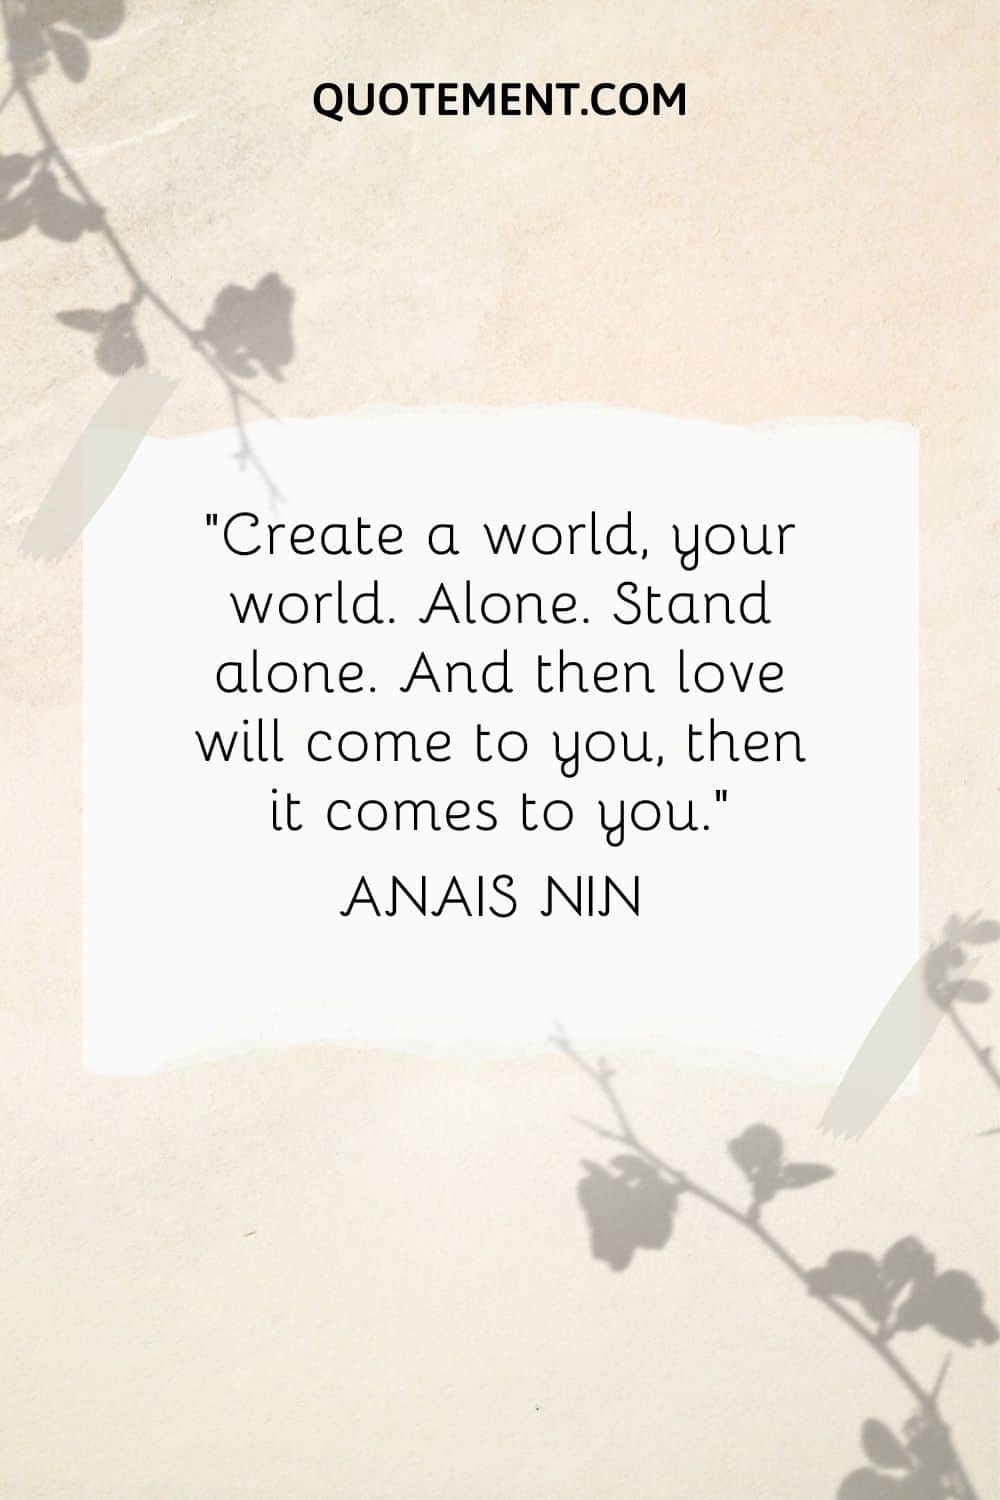 “Create a world, your world. Alone. Stand alone. And then love will come to you, then it comes to you.” — Anais Nin